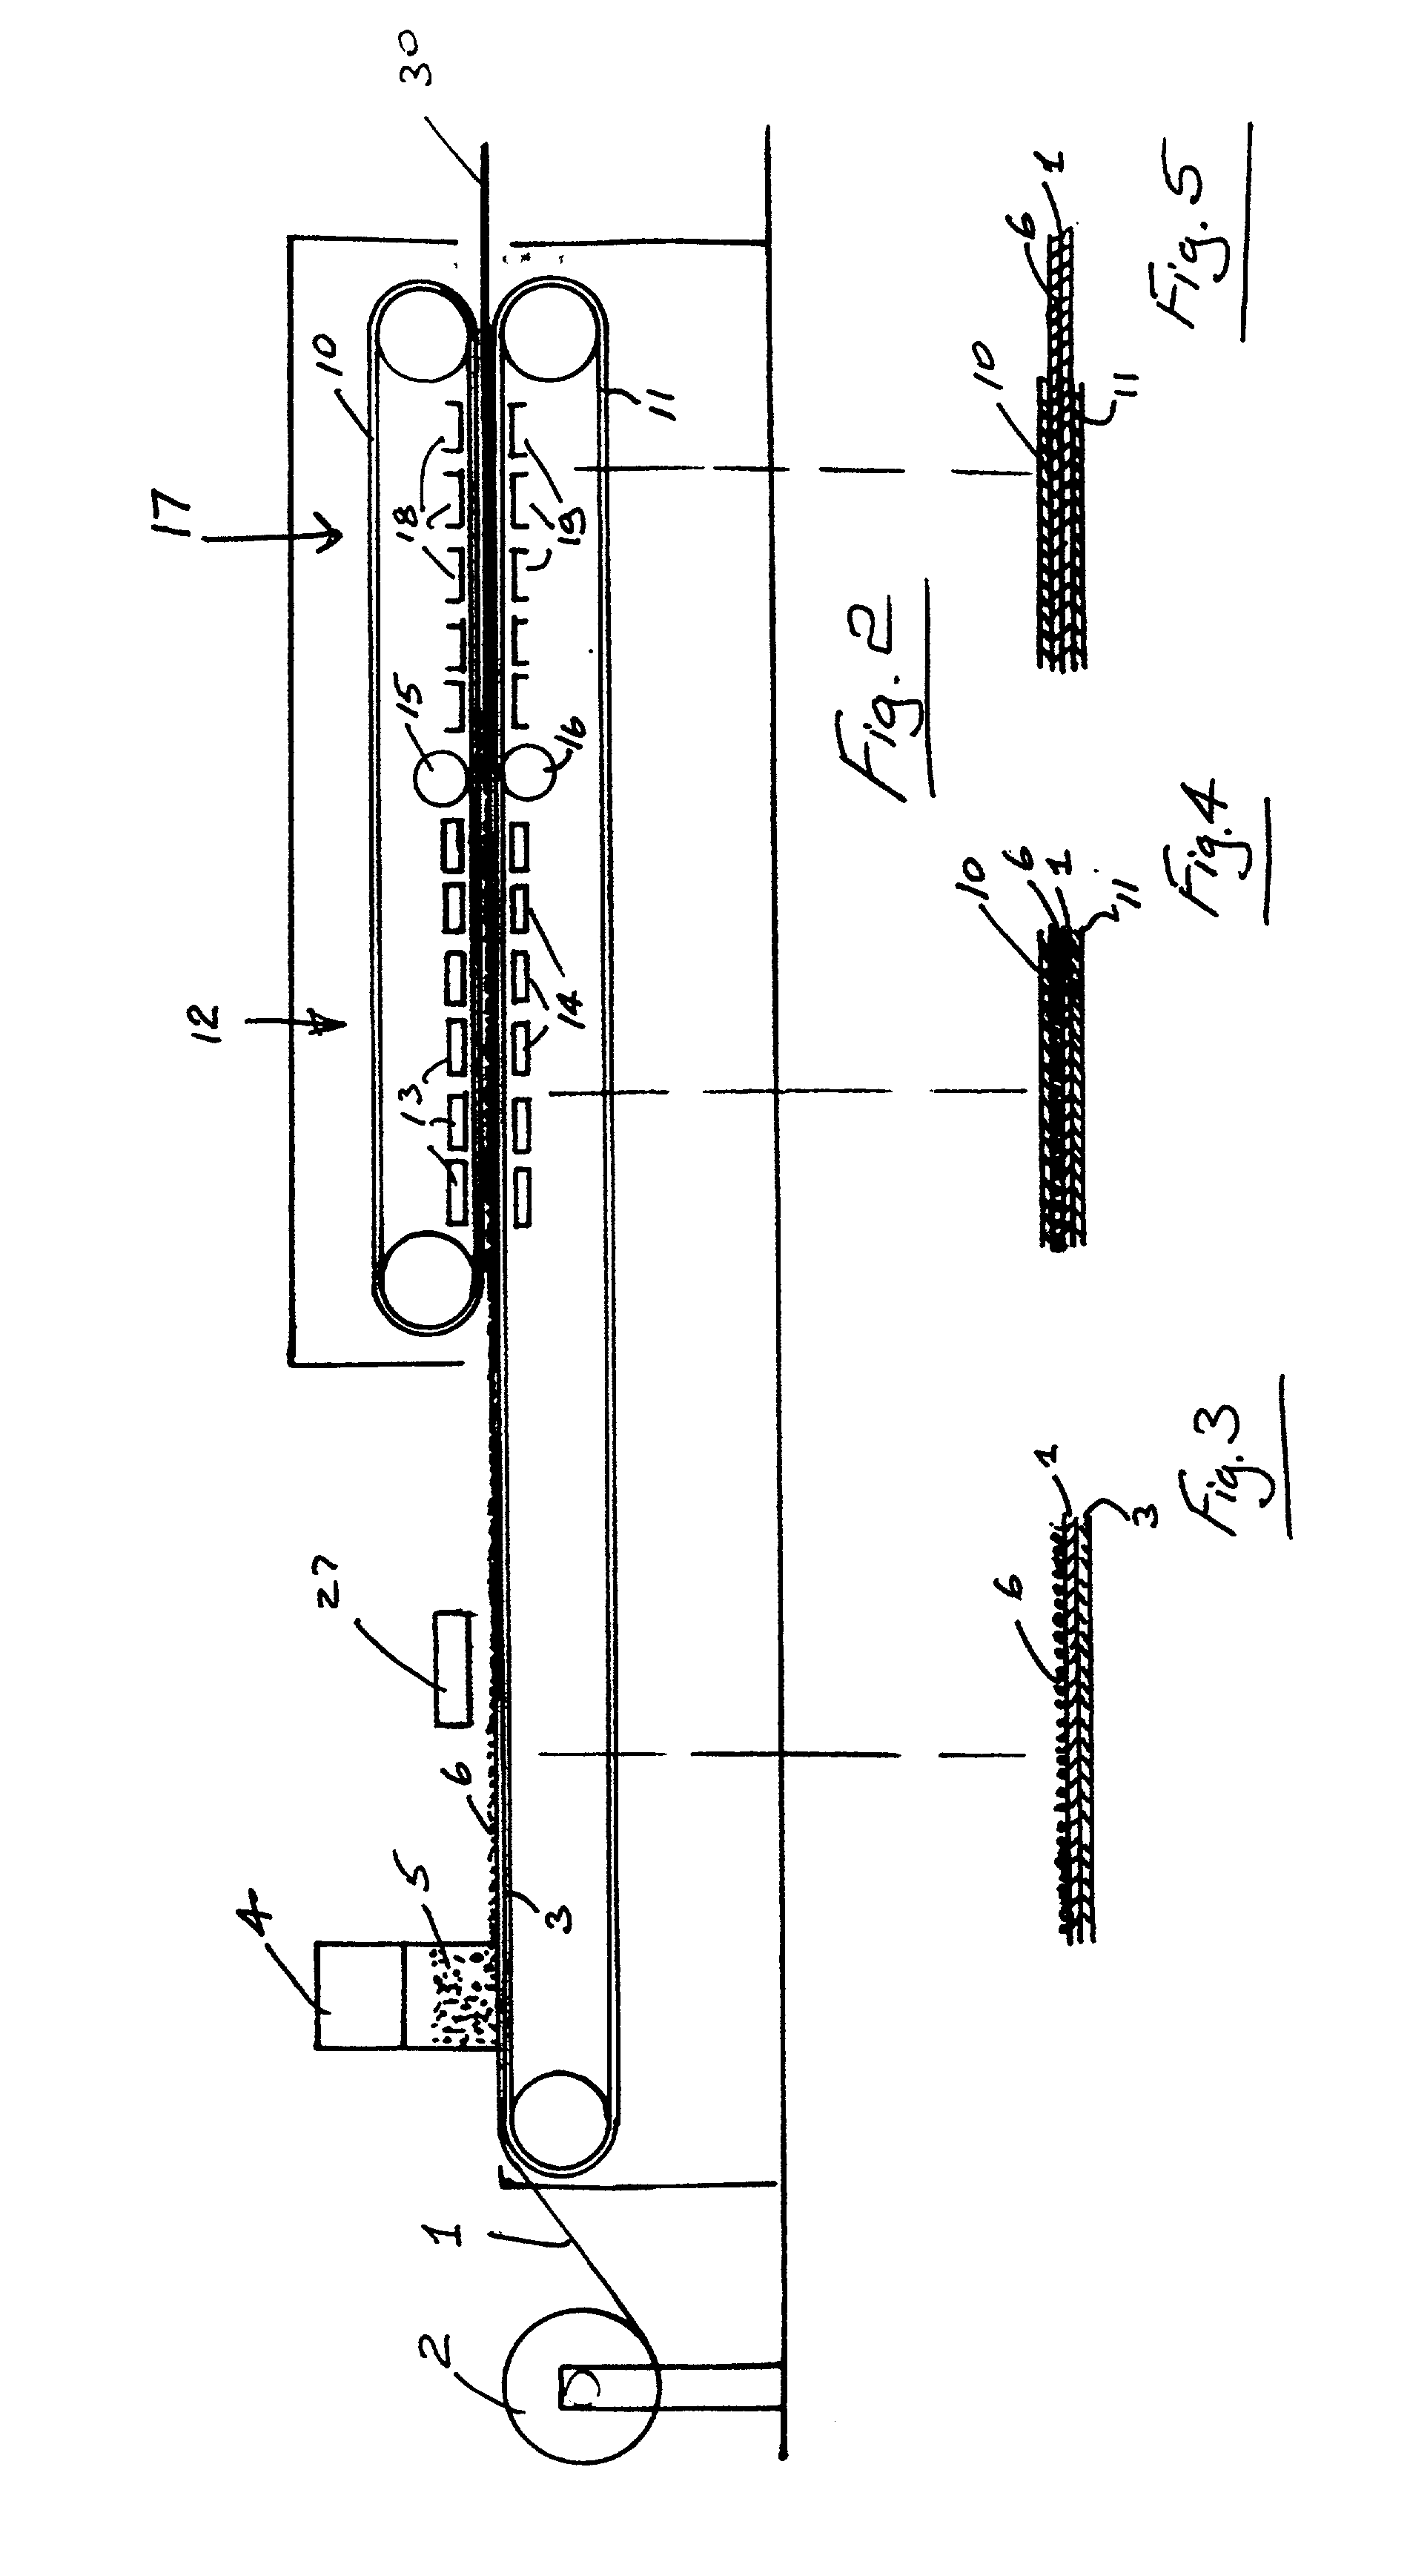 Method for manufacturing a floor covering